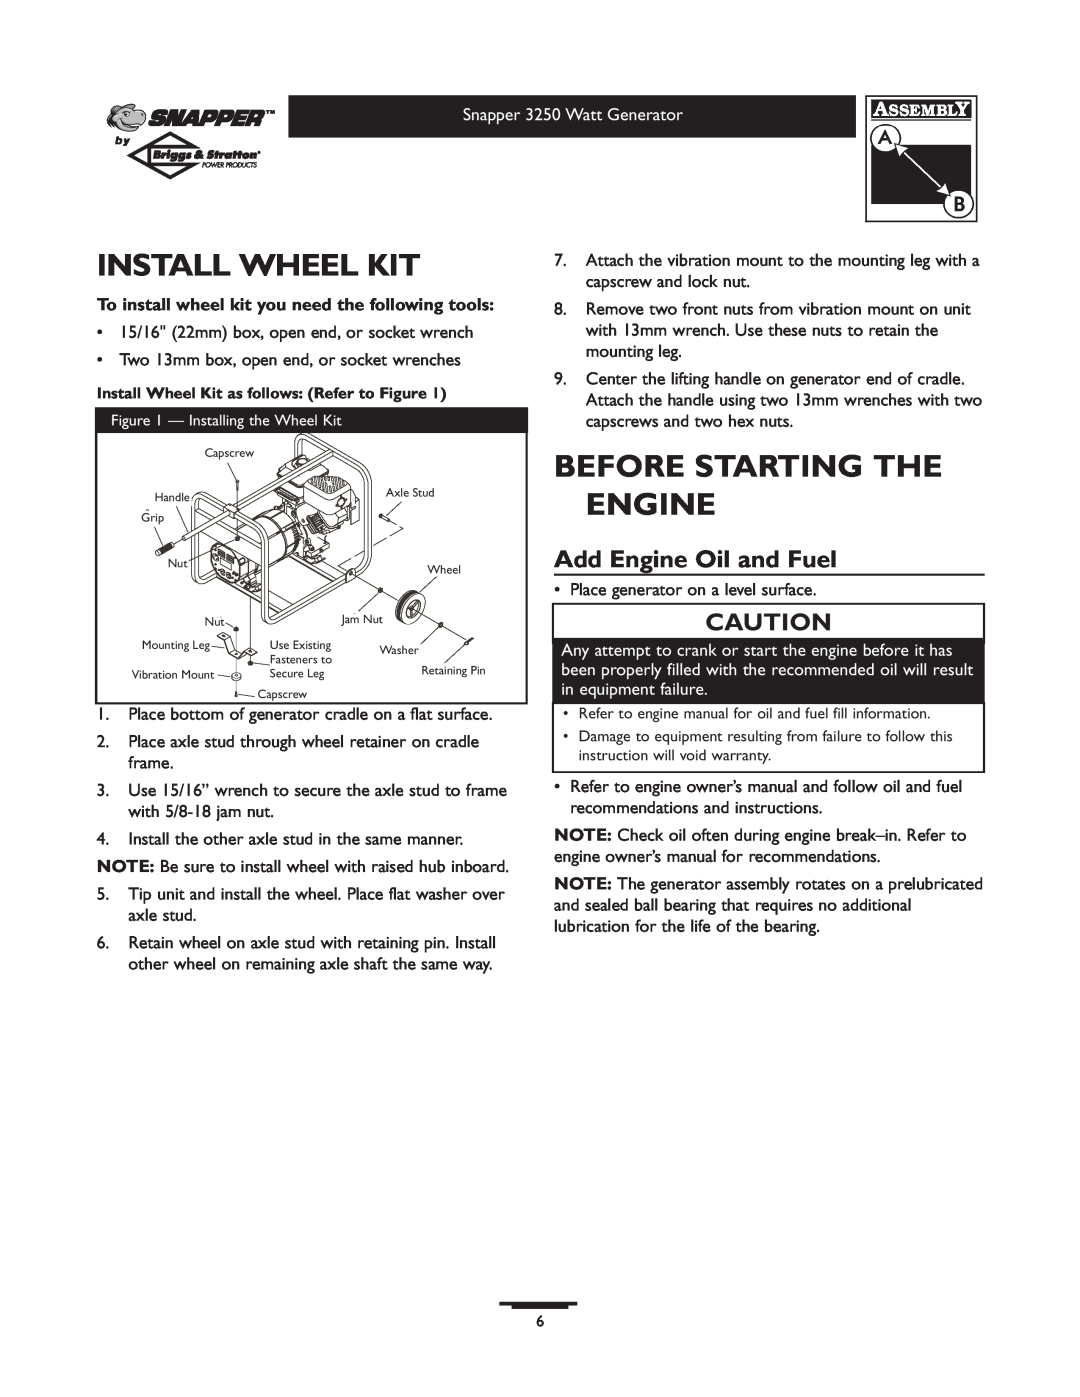 Snapper owner manual Install Wheel Kit, Before Starting The Engine, Add Engine Oil and Fuel, Snapper 3250 Watt Generator 